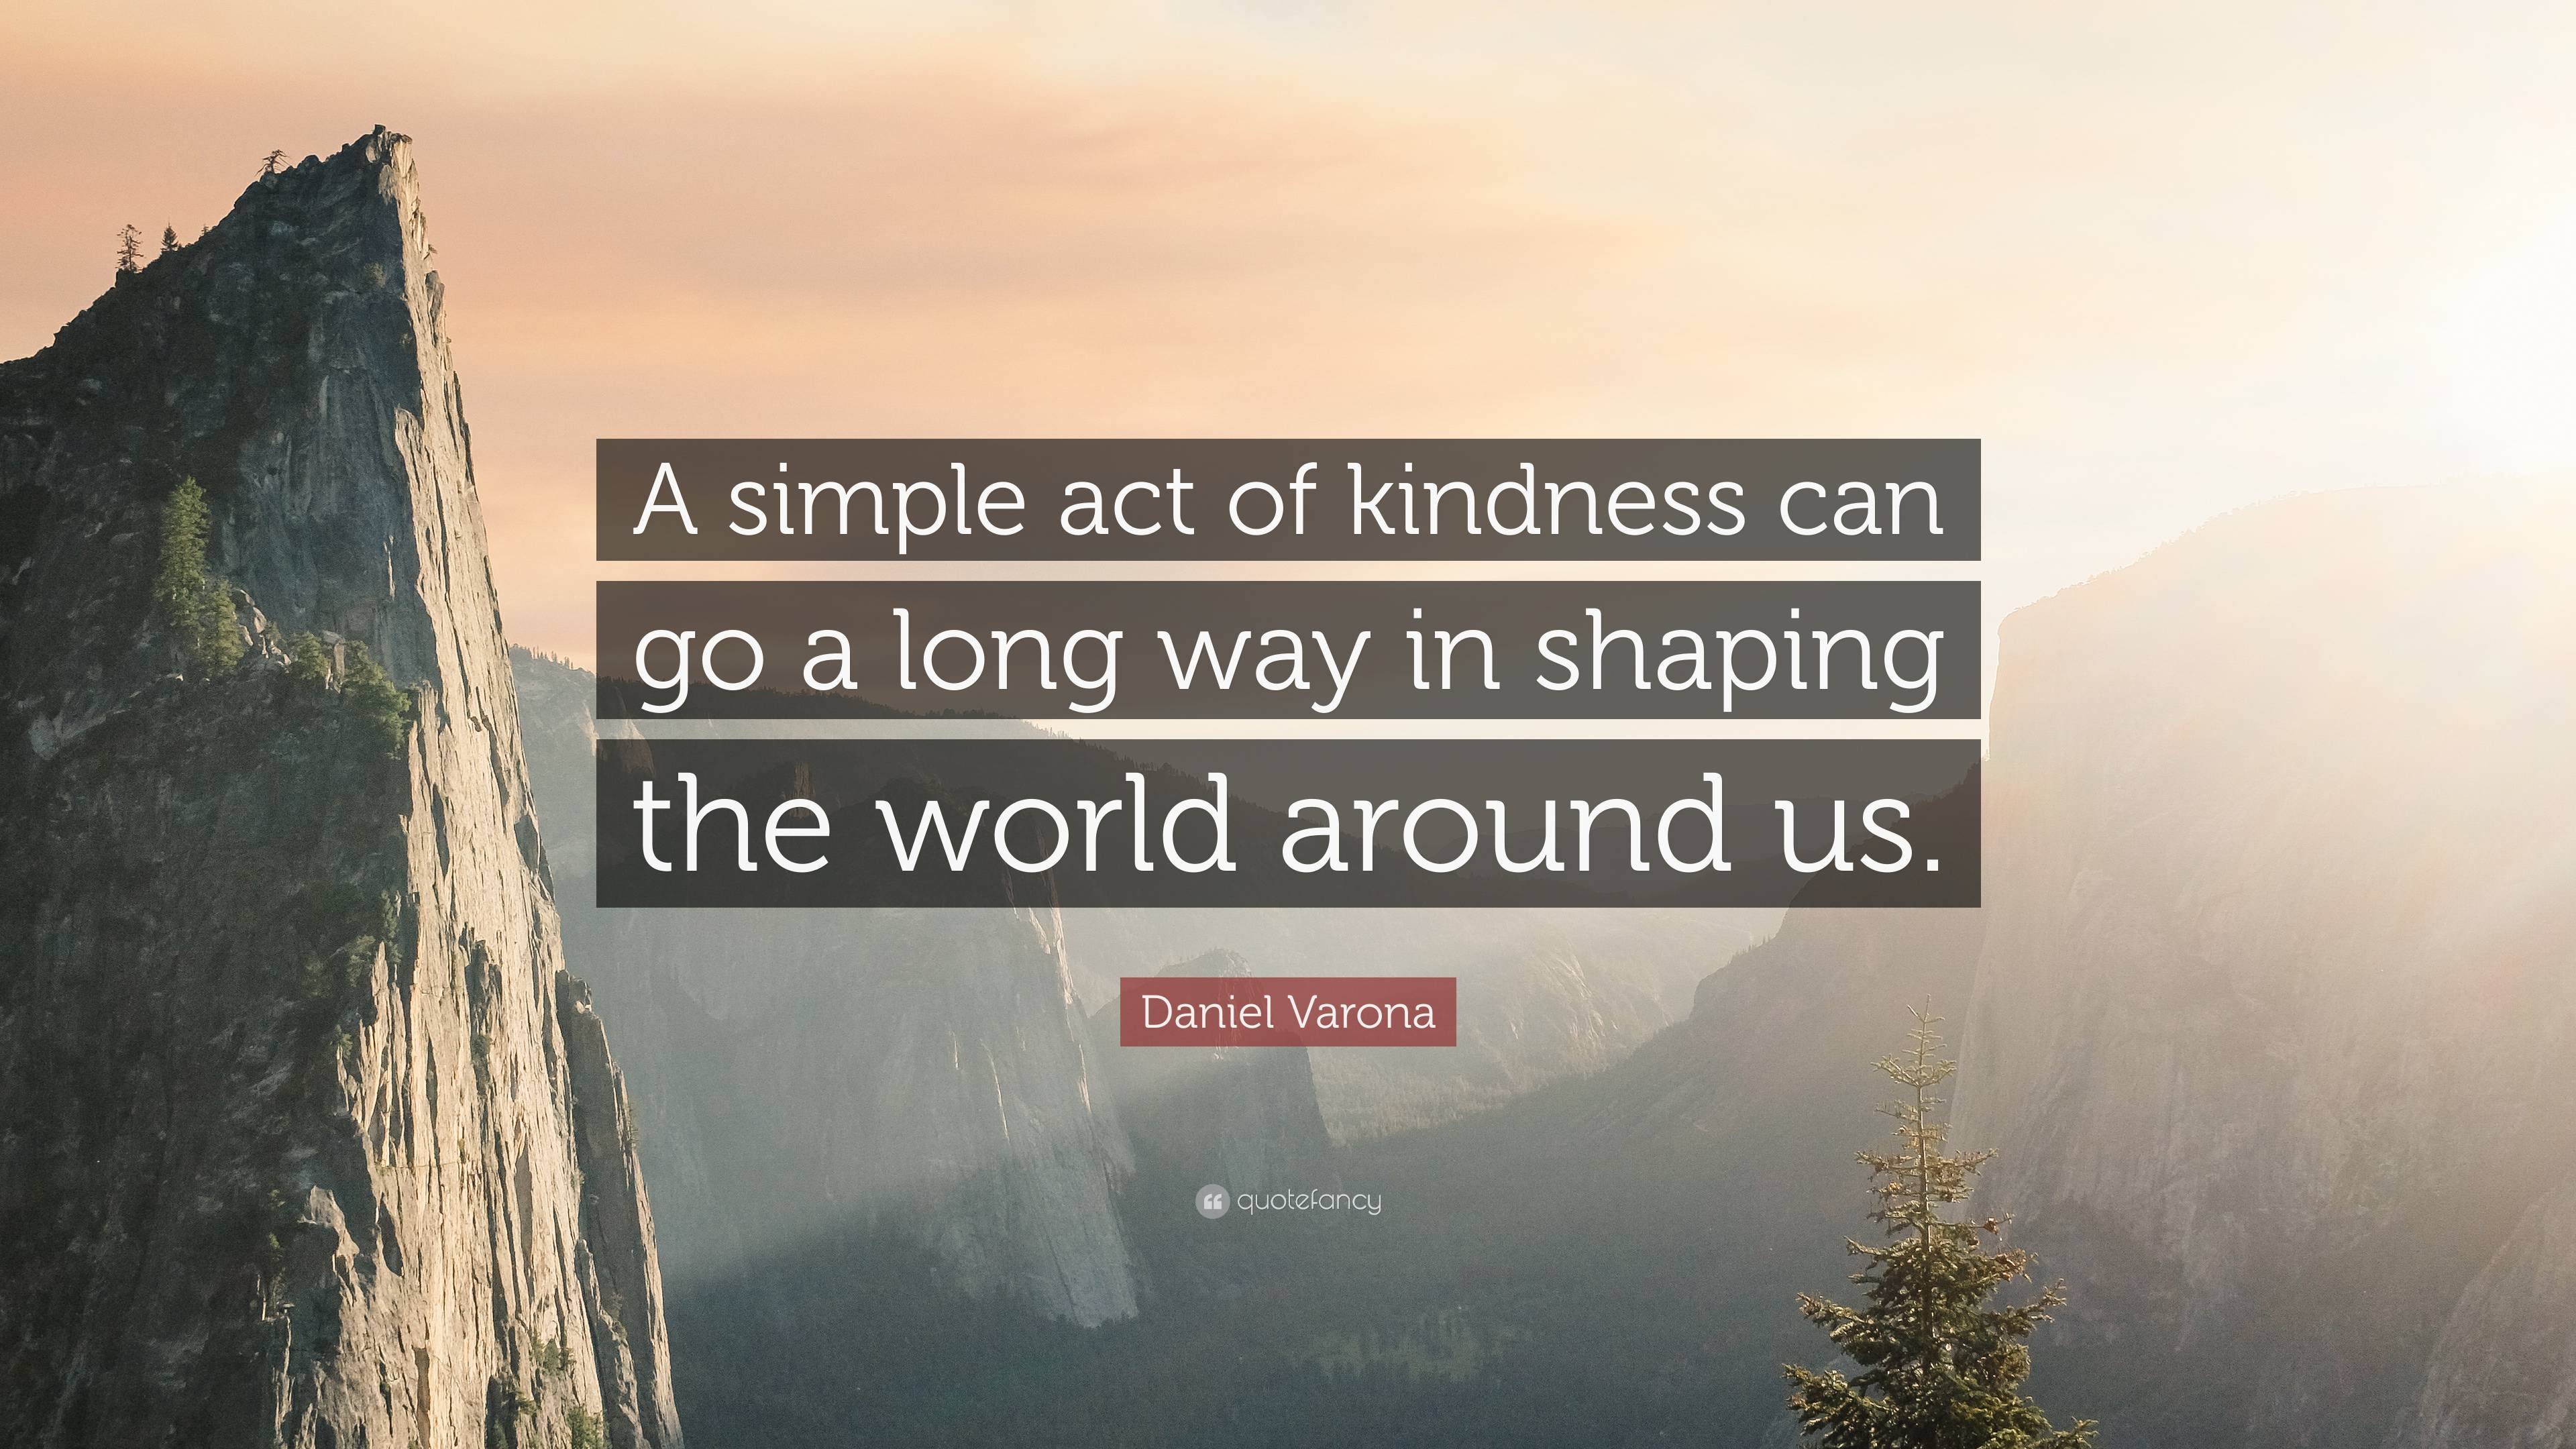 Daniel Varona Quote: “A simple act of kindness can go a long way in shaping  the